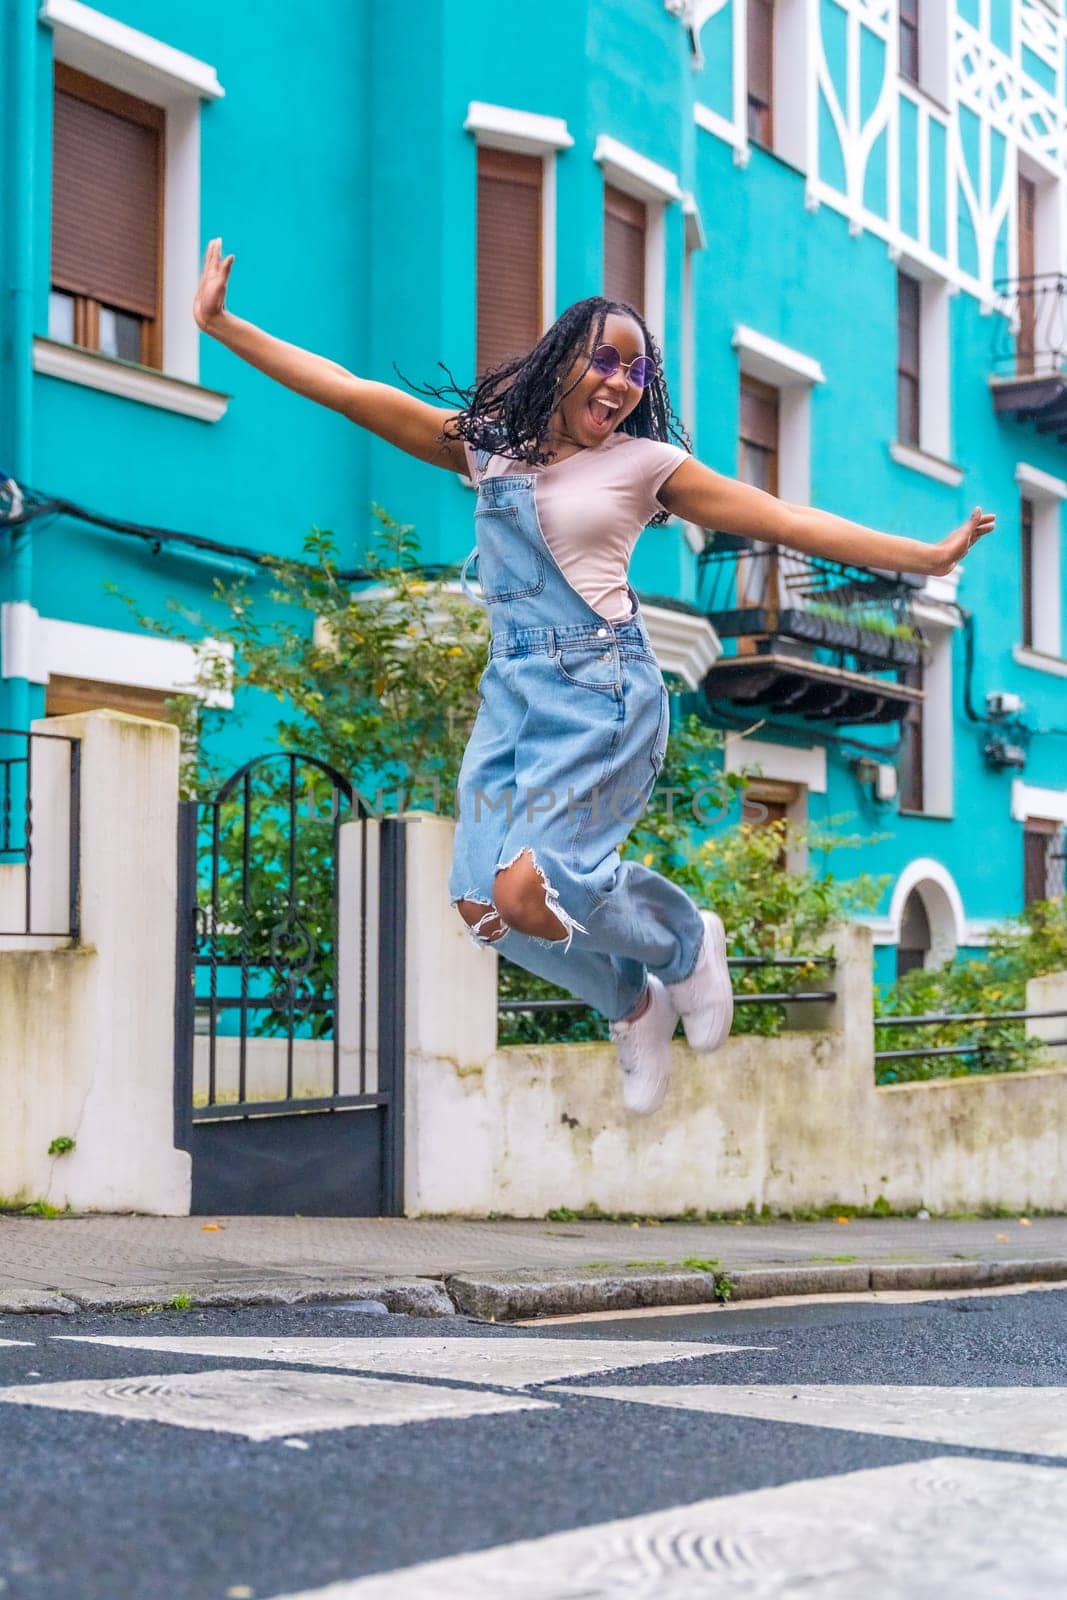 Happy and free afro woman jumping in a colorful street by Huizi